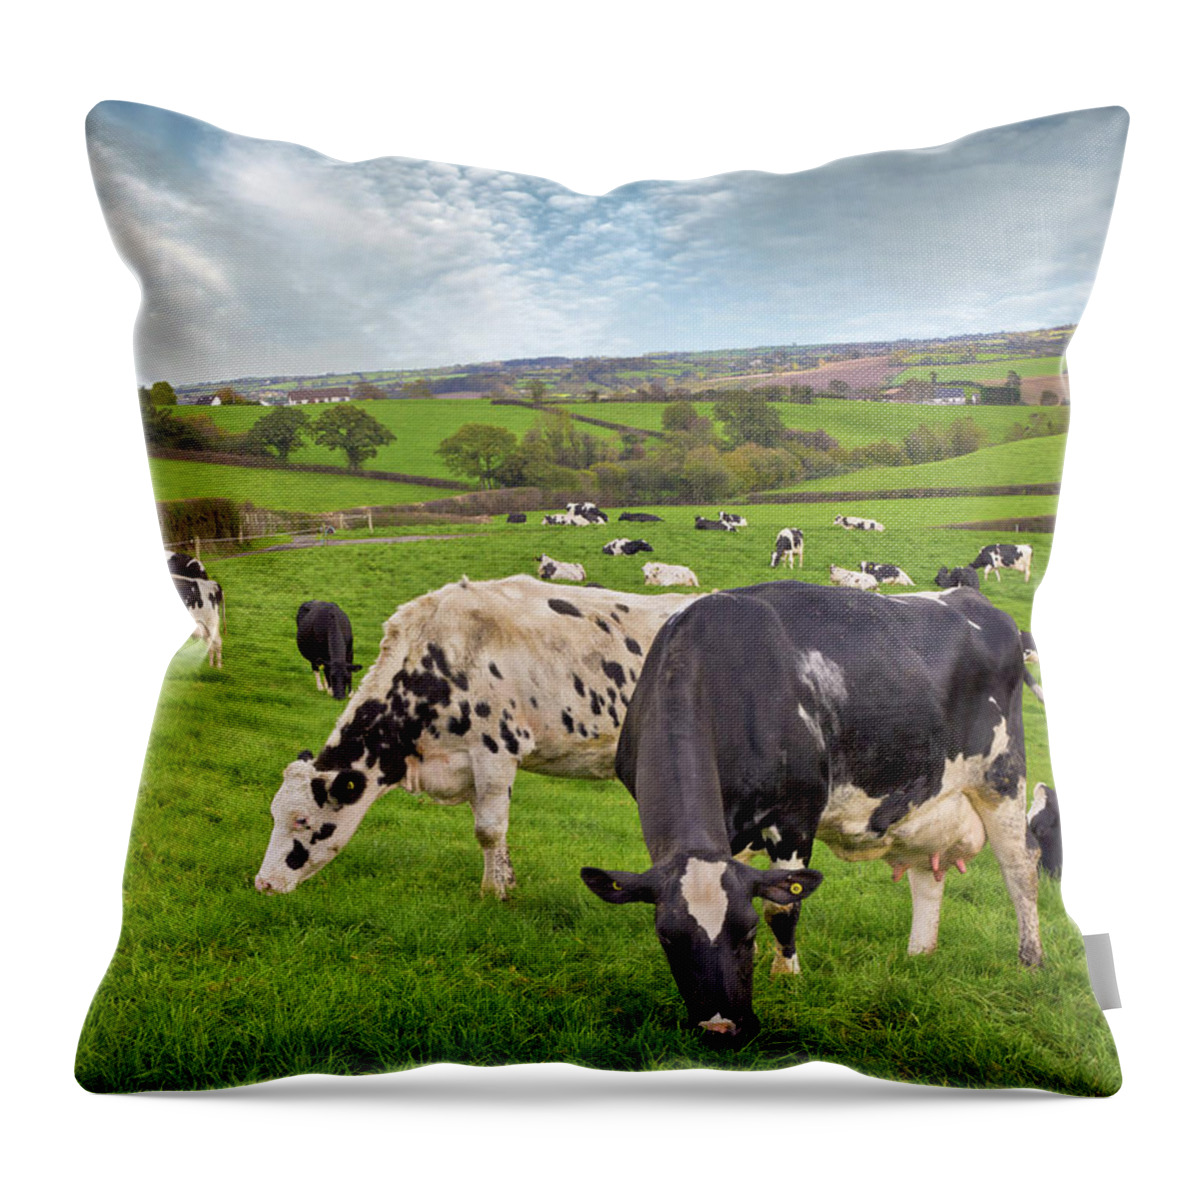 Scenics Throw Pillow featuring the photograph Cows Grazing by Photograph Taken By Alan Hopps